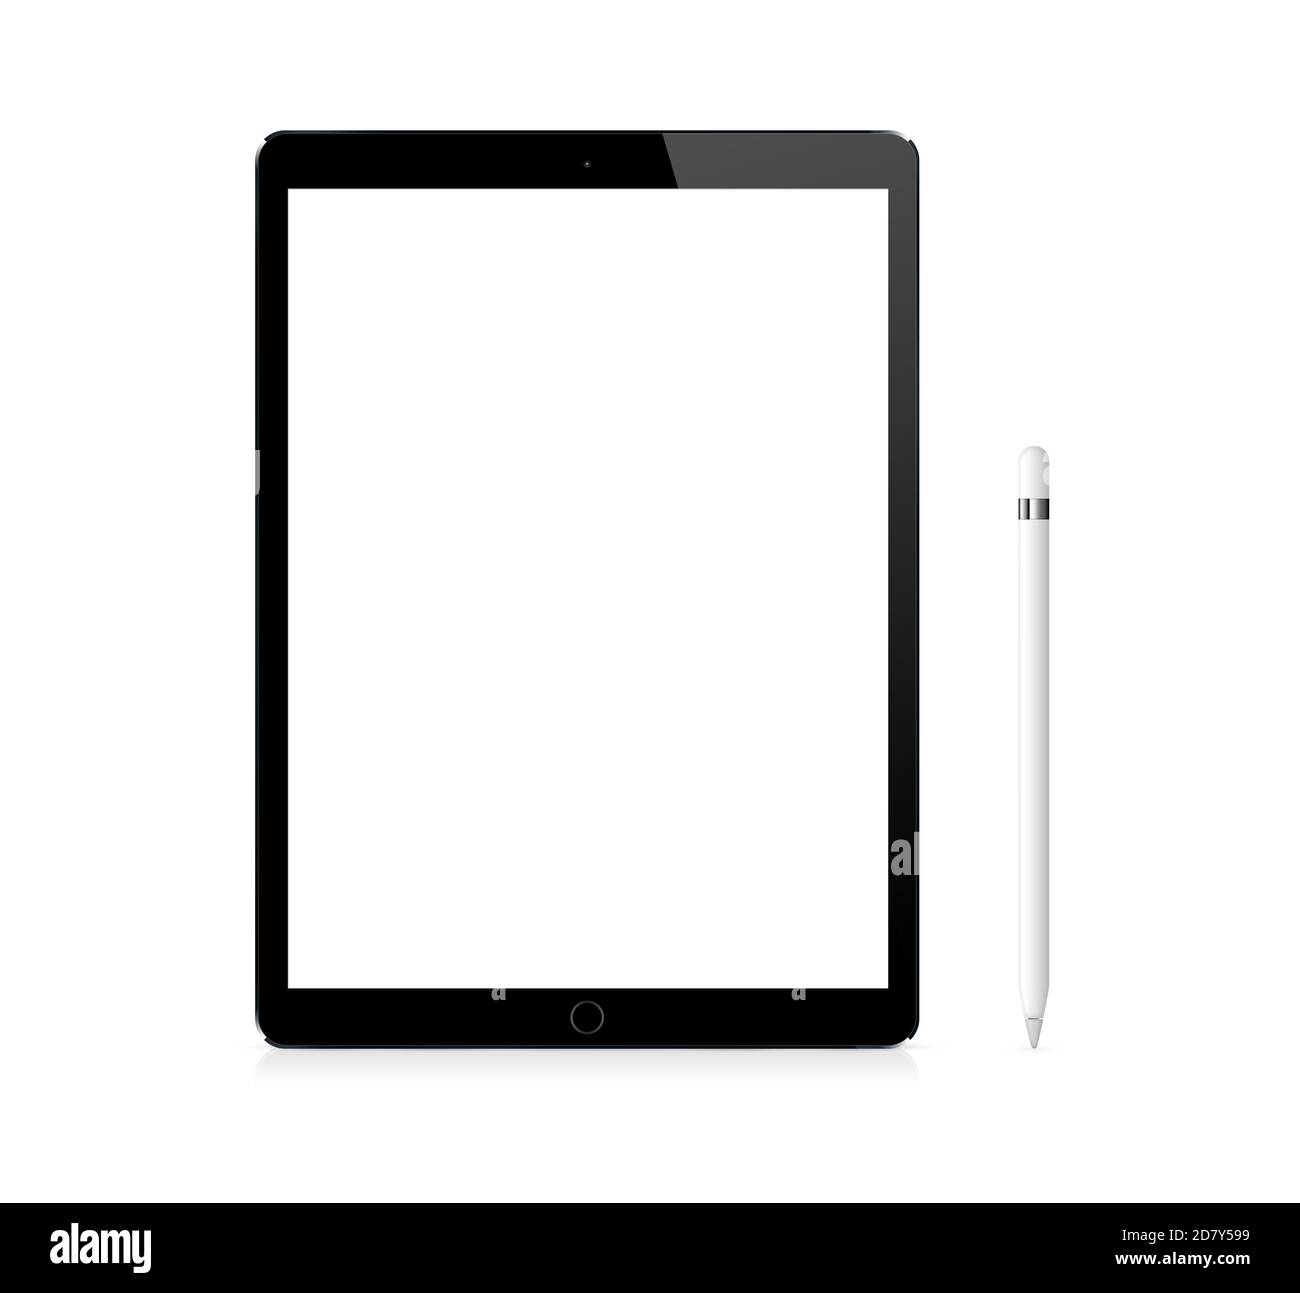 The black portable tablet device with stylus pen Stock Photo